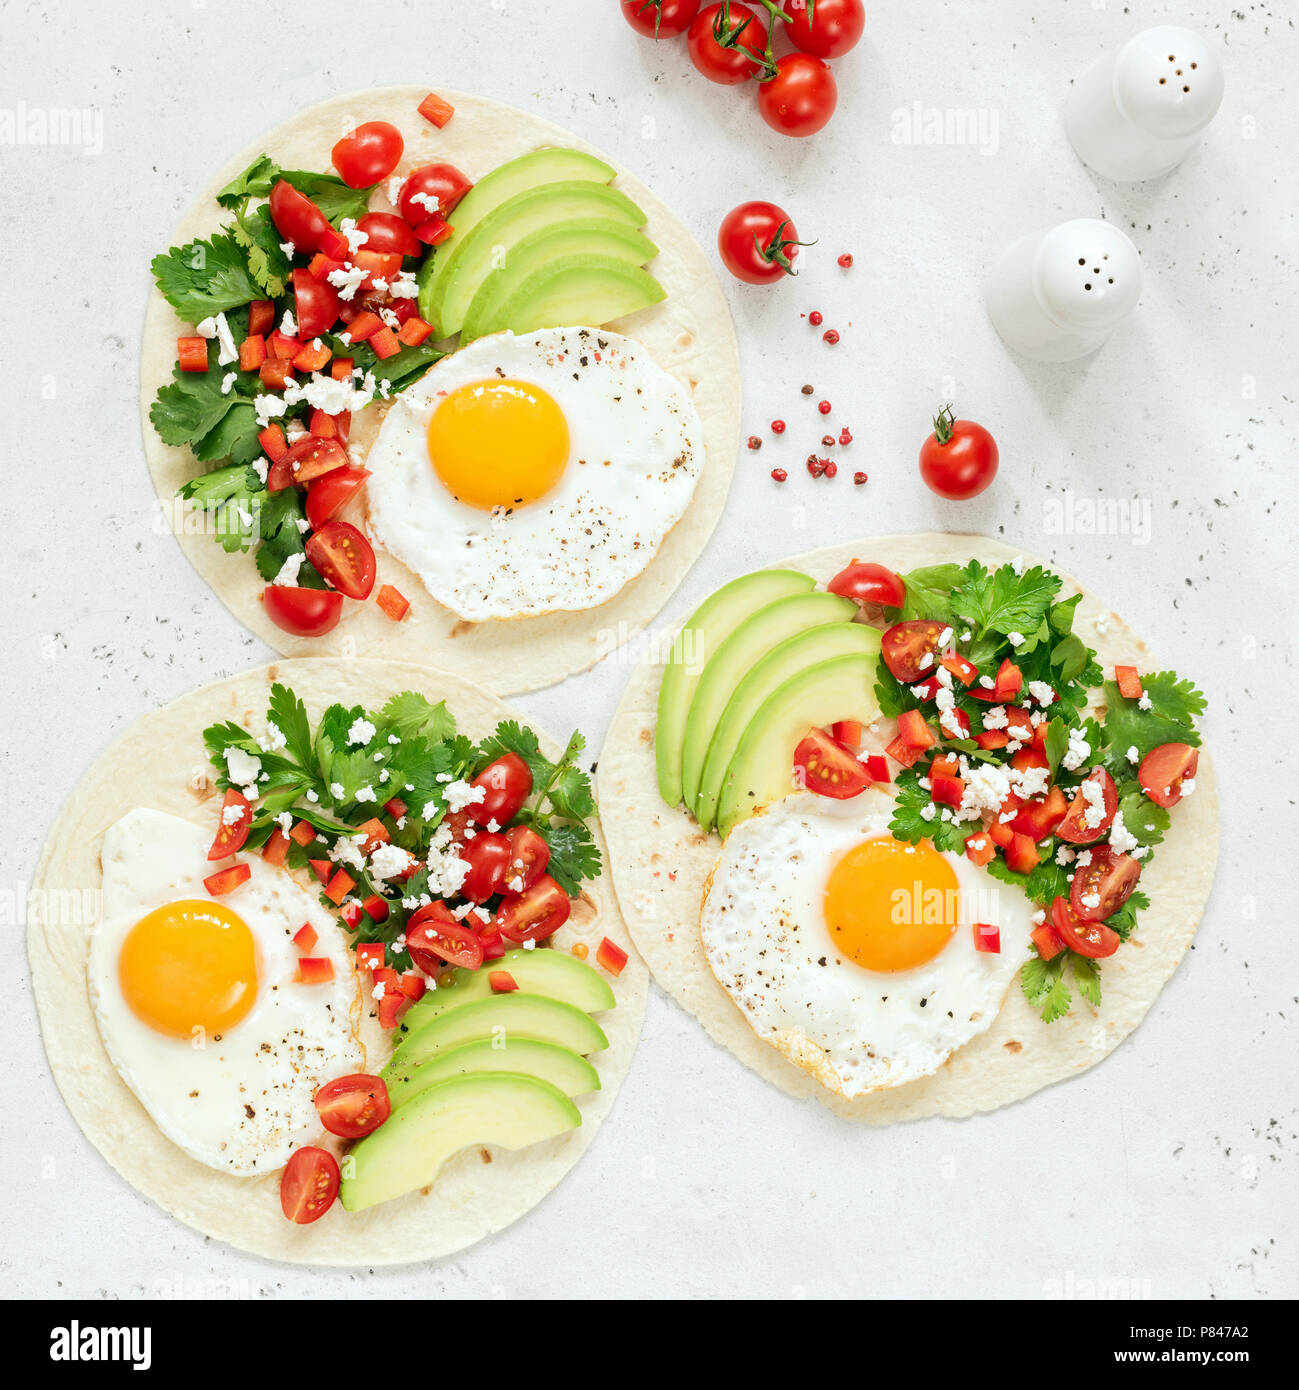 Breakfast tortilla taco with egg, avocado, salsa on bright background, top view, square crop Stock Photo